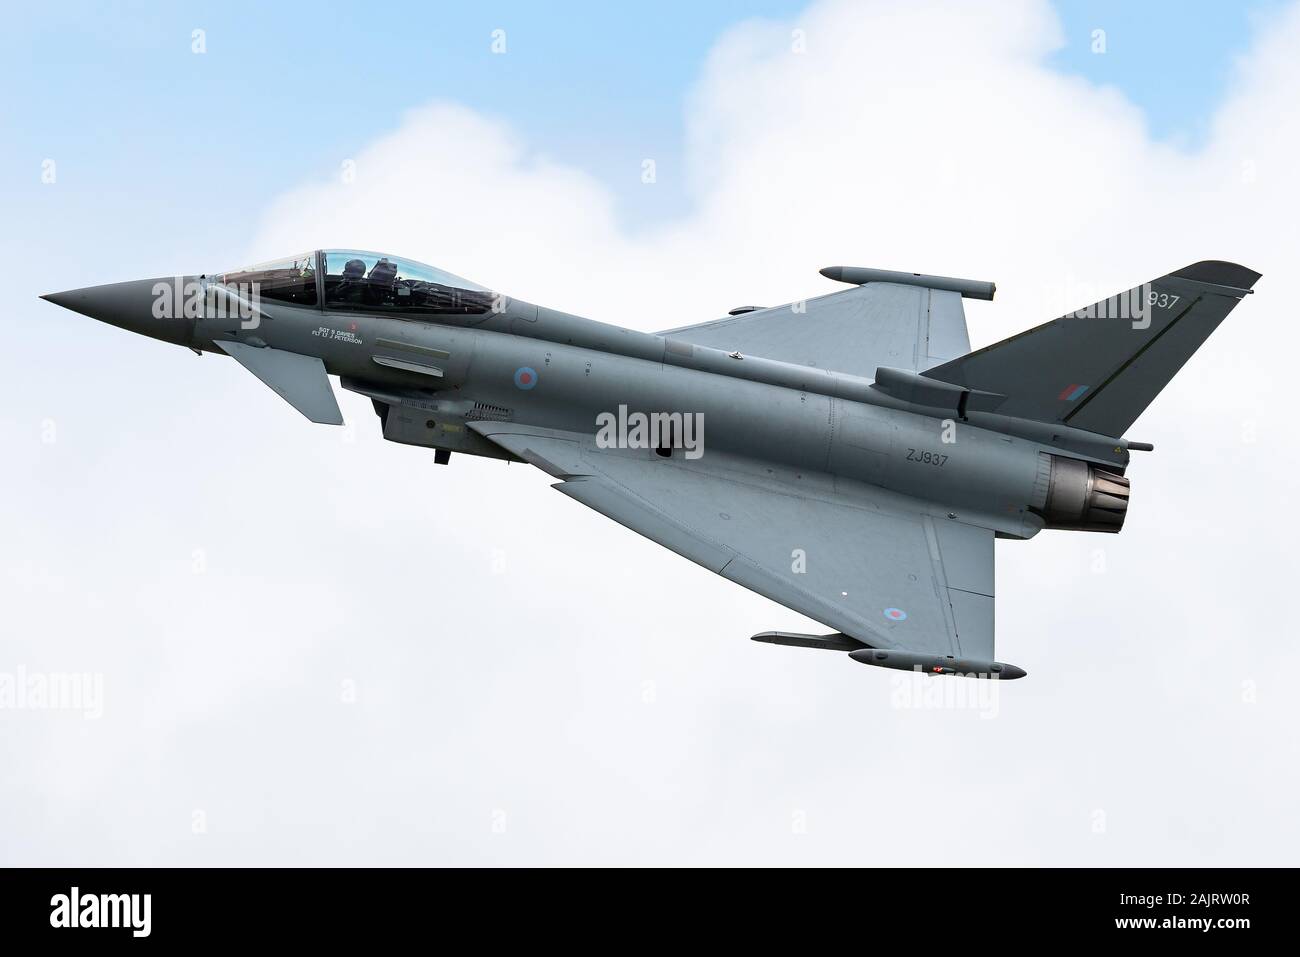 A Eurofighter Typhoon FGR4 fighter jet of the British Royal Air Force at RIAT 2019. Stock Photo